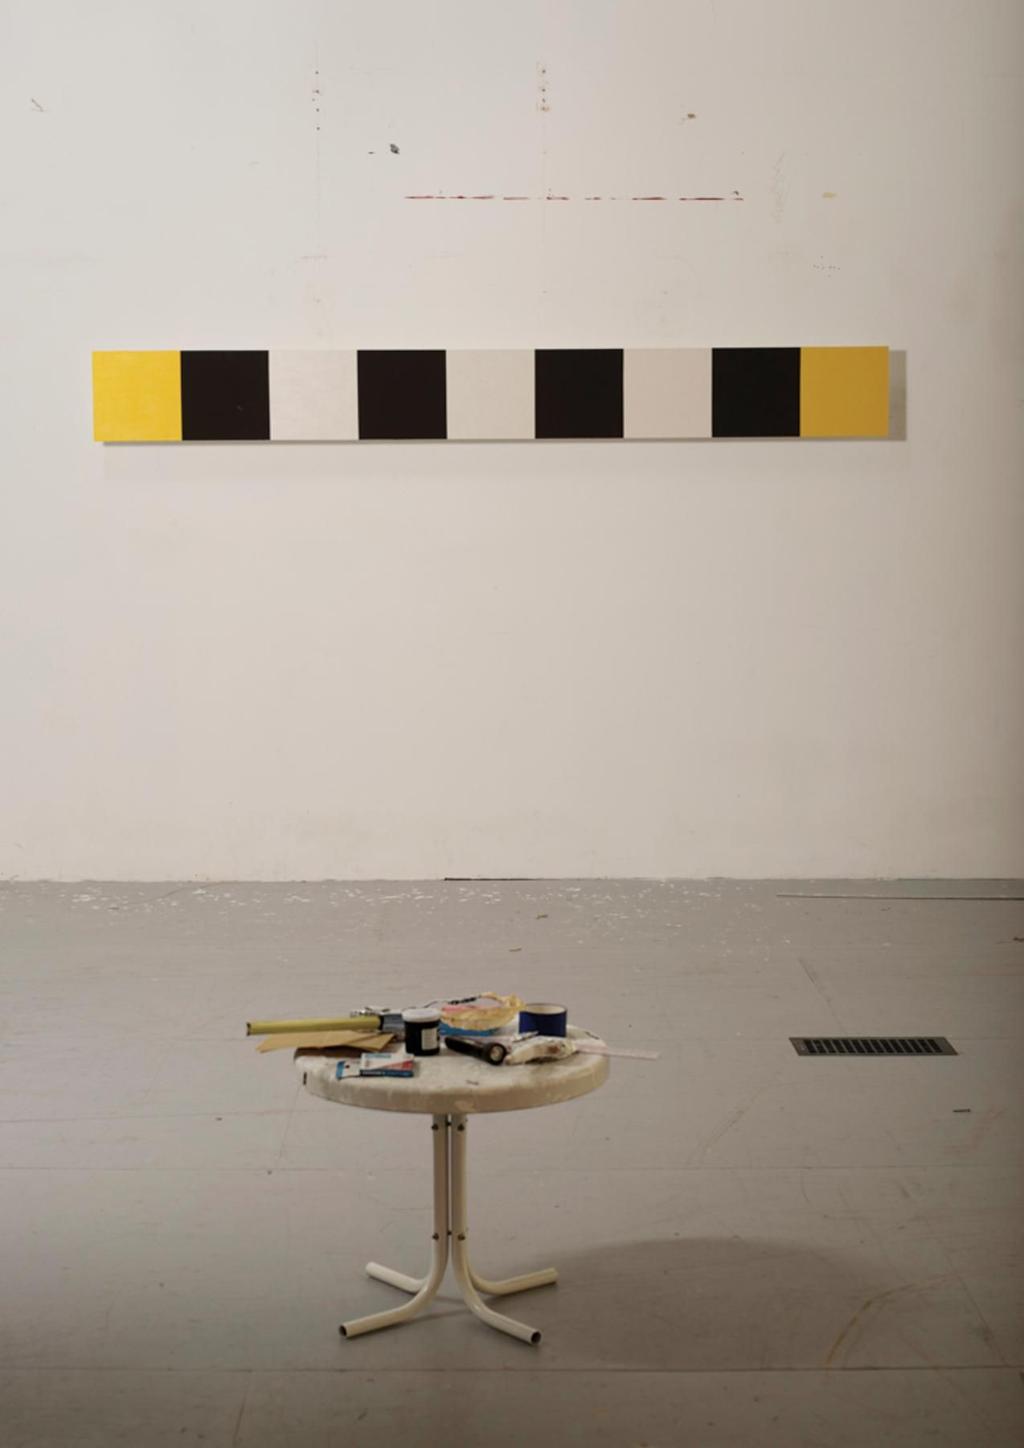 TOOLS OF THE TRADE Corse s painting Untitled (Yellow, Black, White, Beveled), 2010.